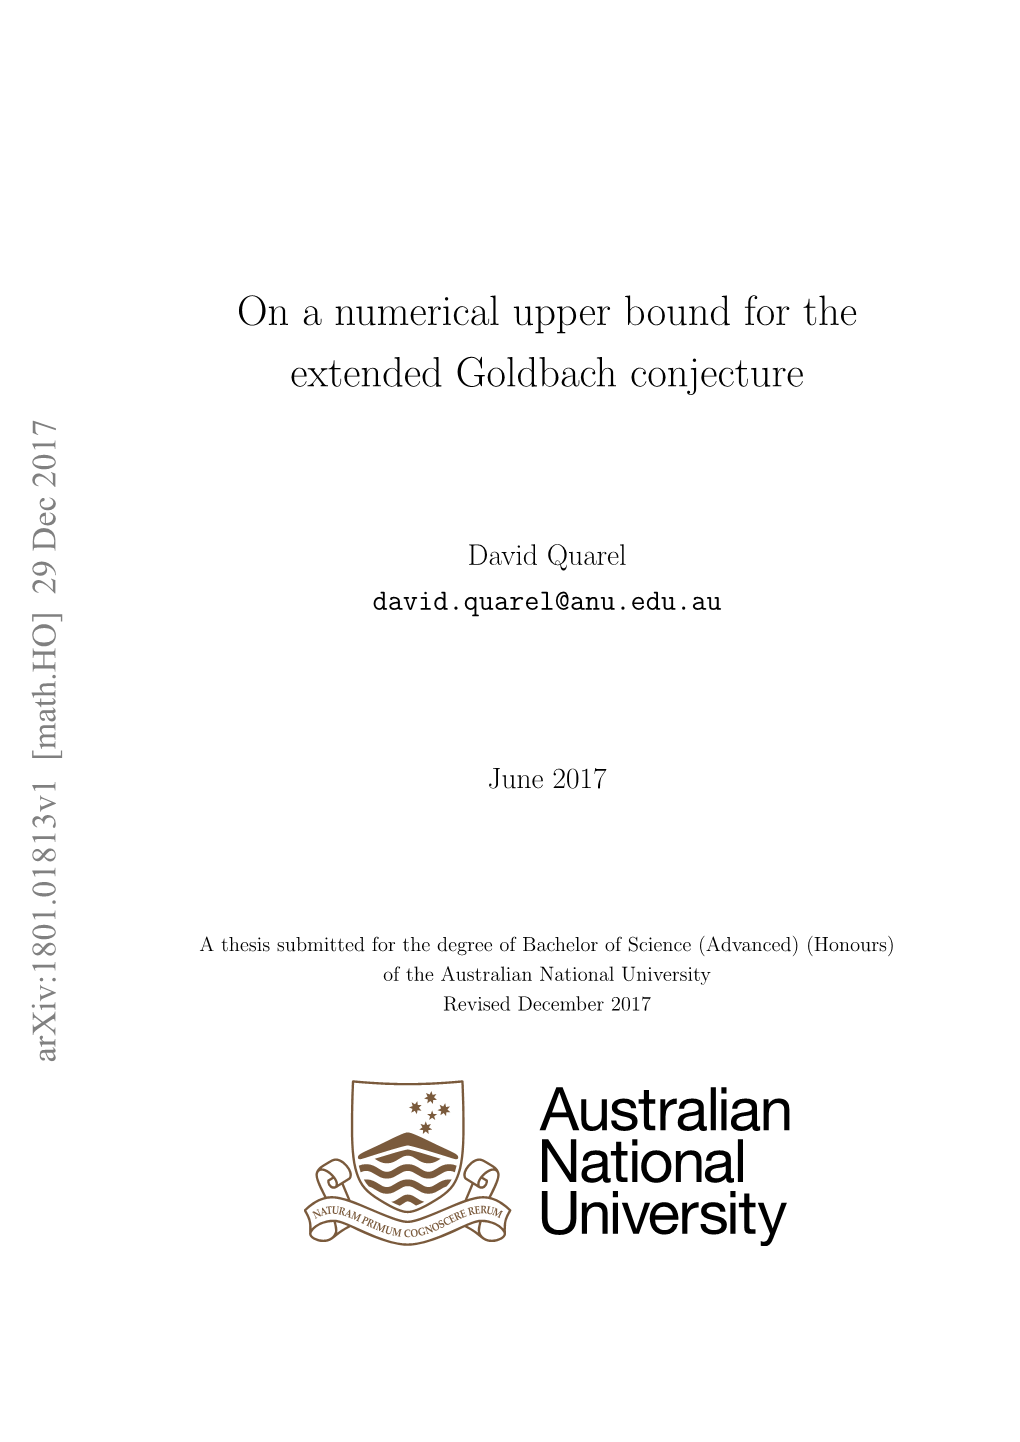 On a Numerical Upper Bound for the Extended Goldbach Conjecture